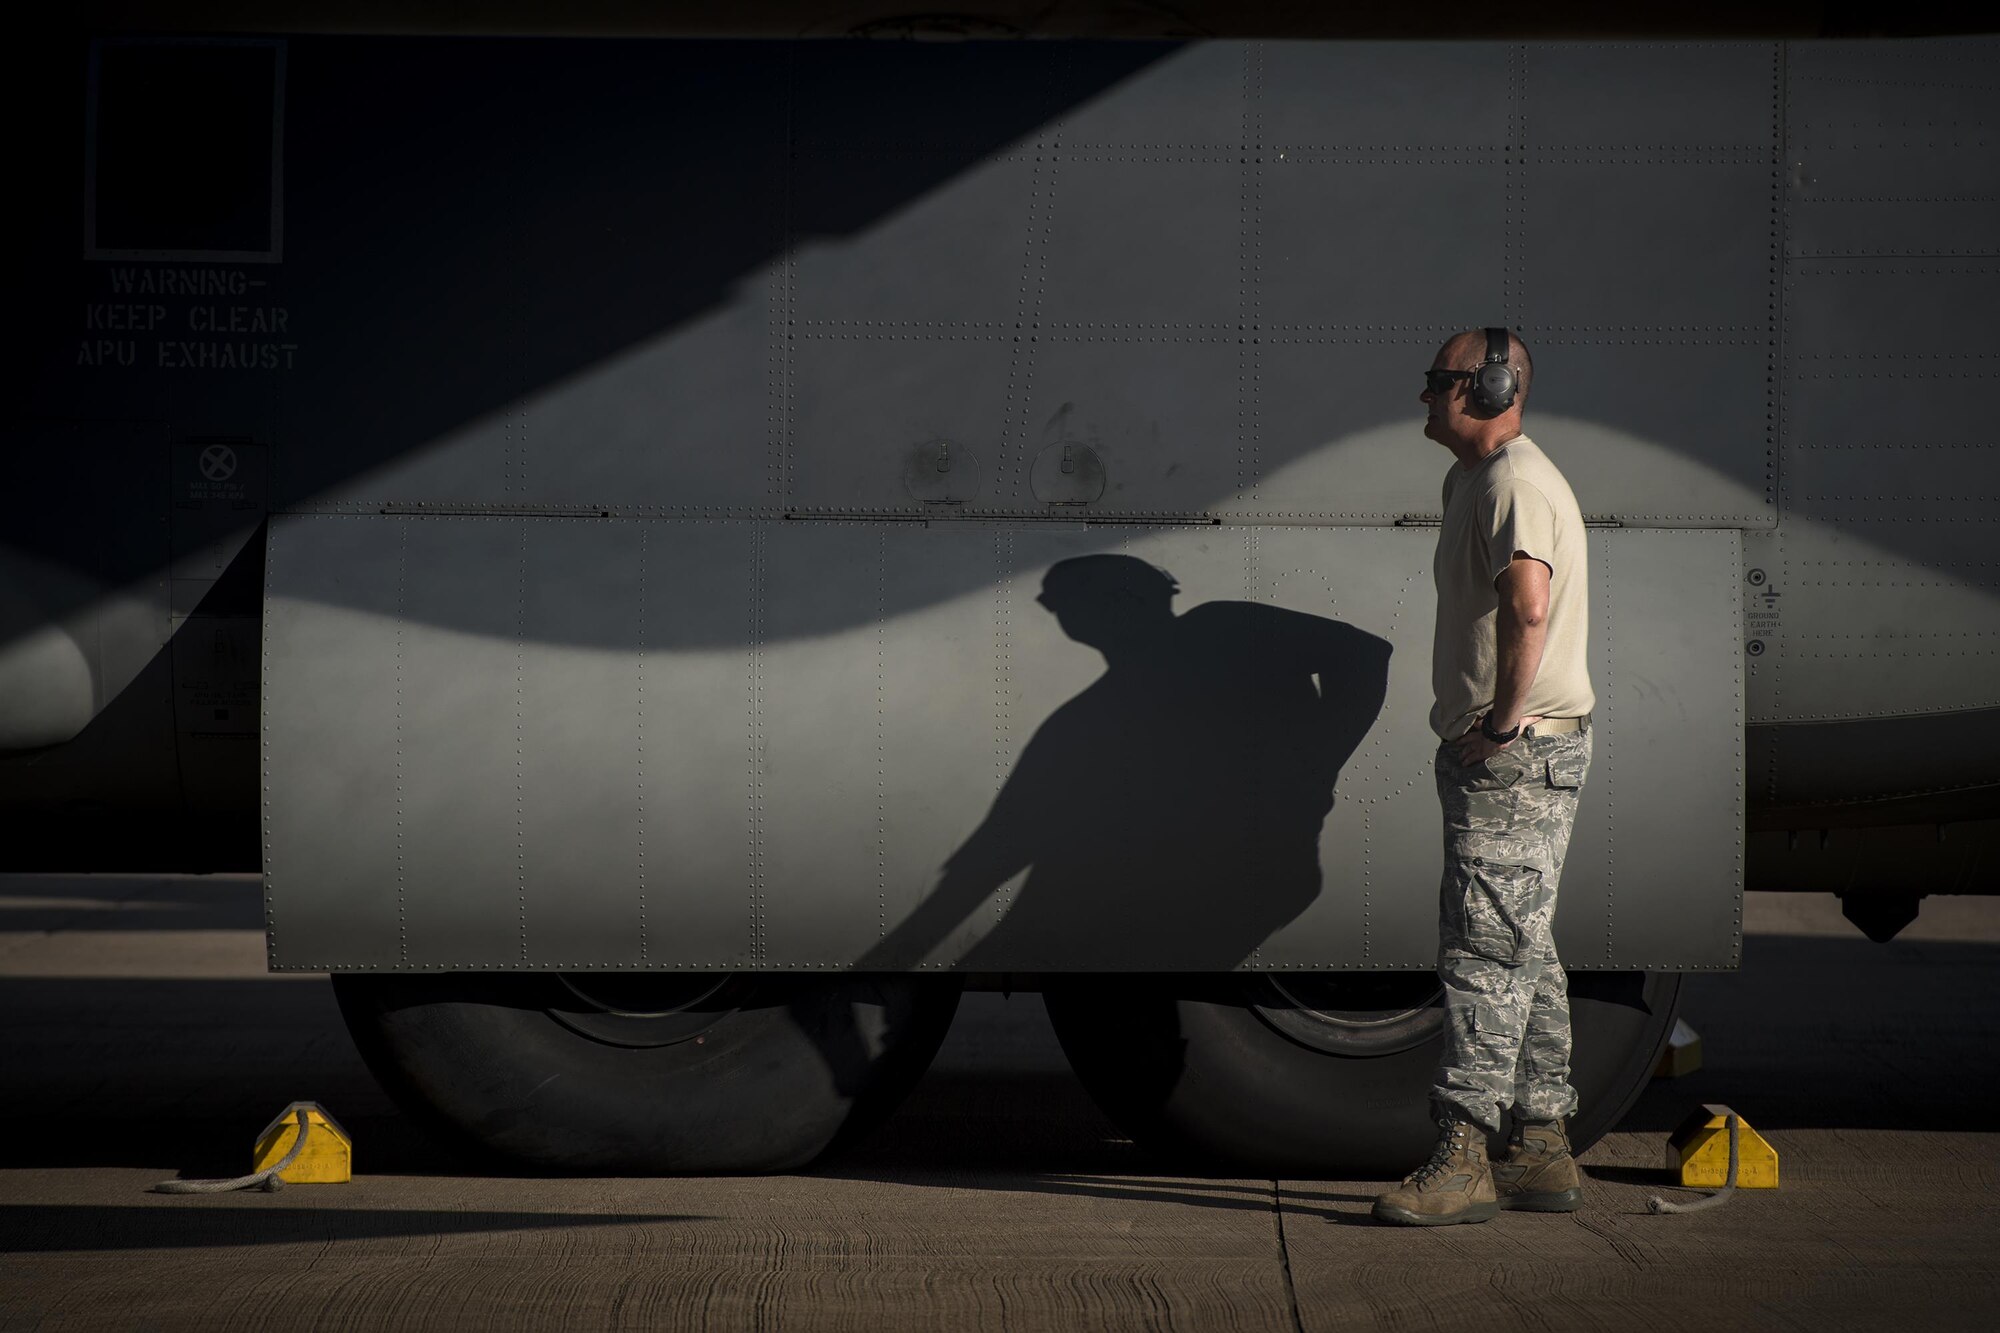 A maintainer from the 71st Aircraft Maintenance Unit waits to pull chocks from under an HC-130J Combat King II prior to a sortie in support of Hurricane Harvey relief efforts, Aug. 28, 2017, at Naval Air Station Fort Worth Joint Reserve Base, Texas. The 347th Rescue Group from Moody Air Force Base, Ga. sent aircraft and personnel in support of Air Forces Northern as part of Northern Command's support of FEMA's disaster response efforts. (U.S. Air Force photo by Staff Sgt. Ryan Callaghan)